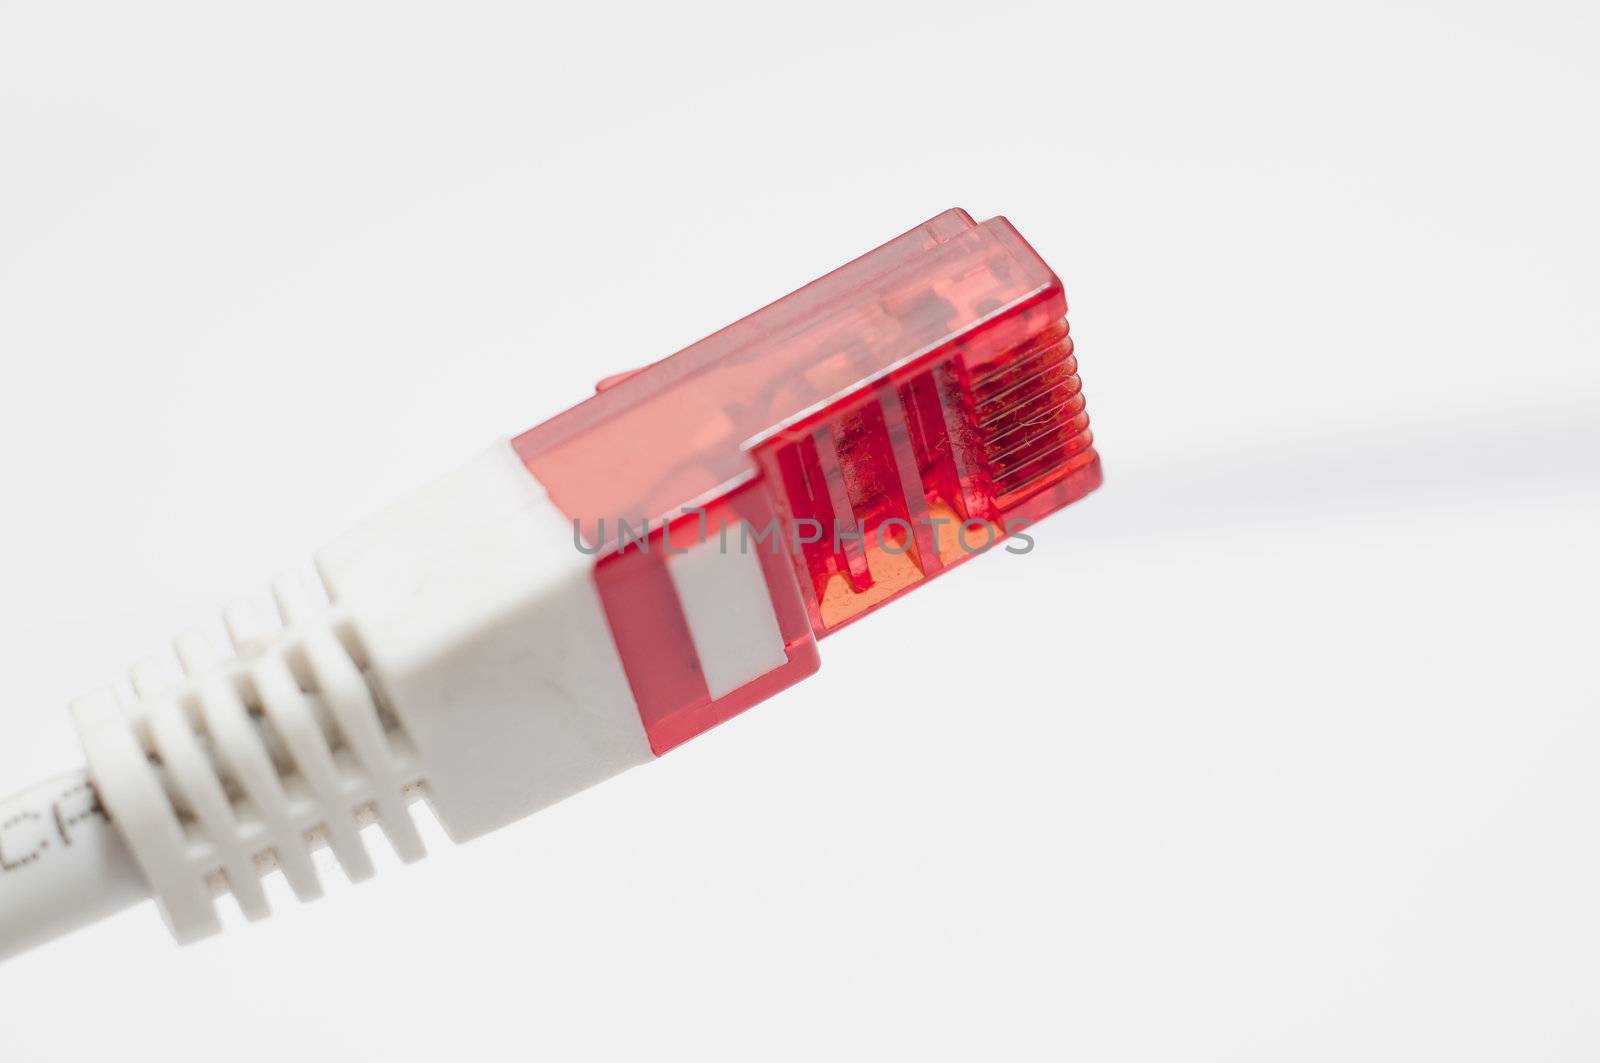 an image of computer network cable on white background